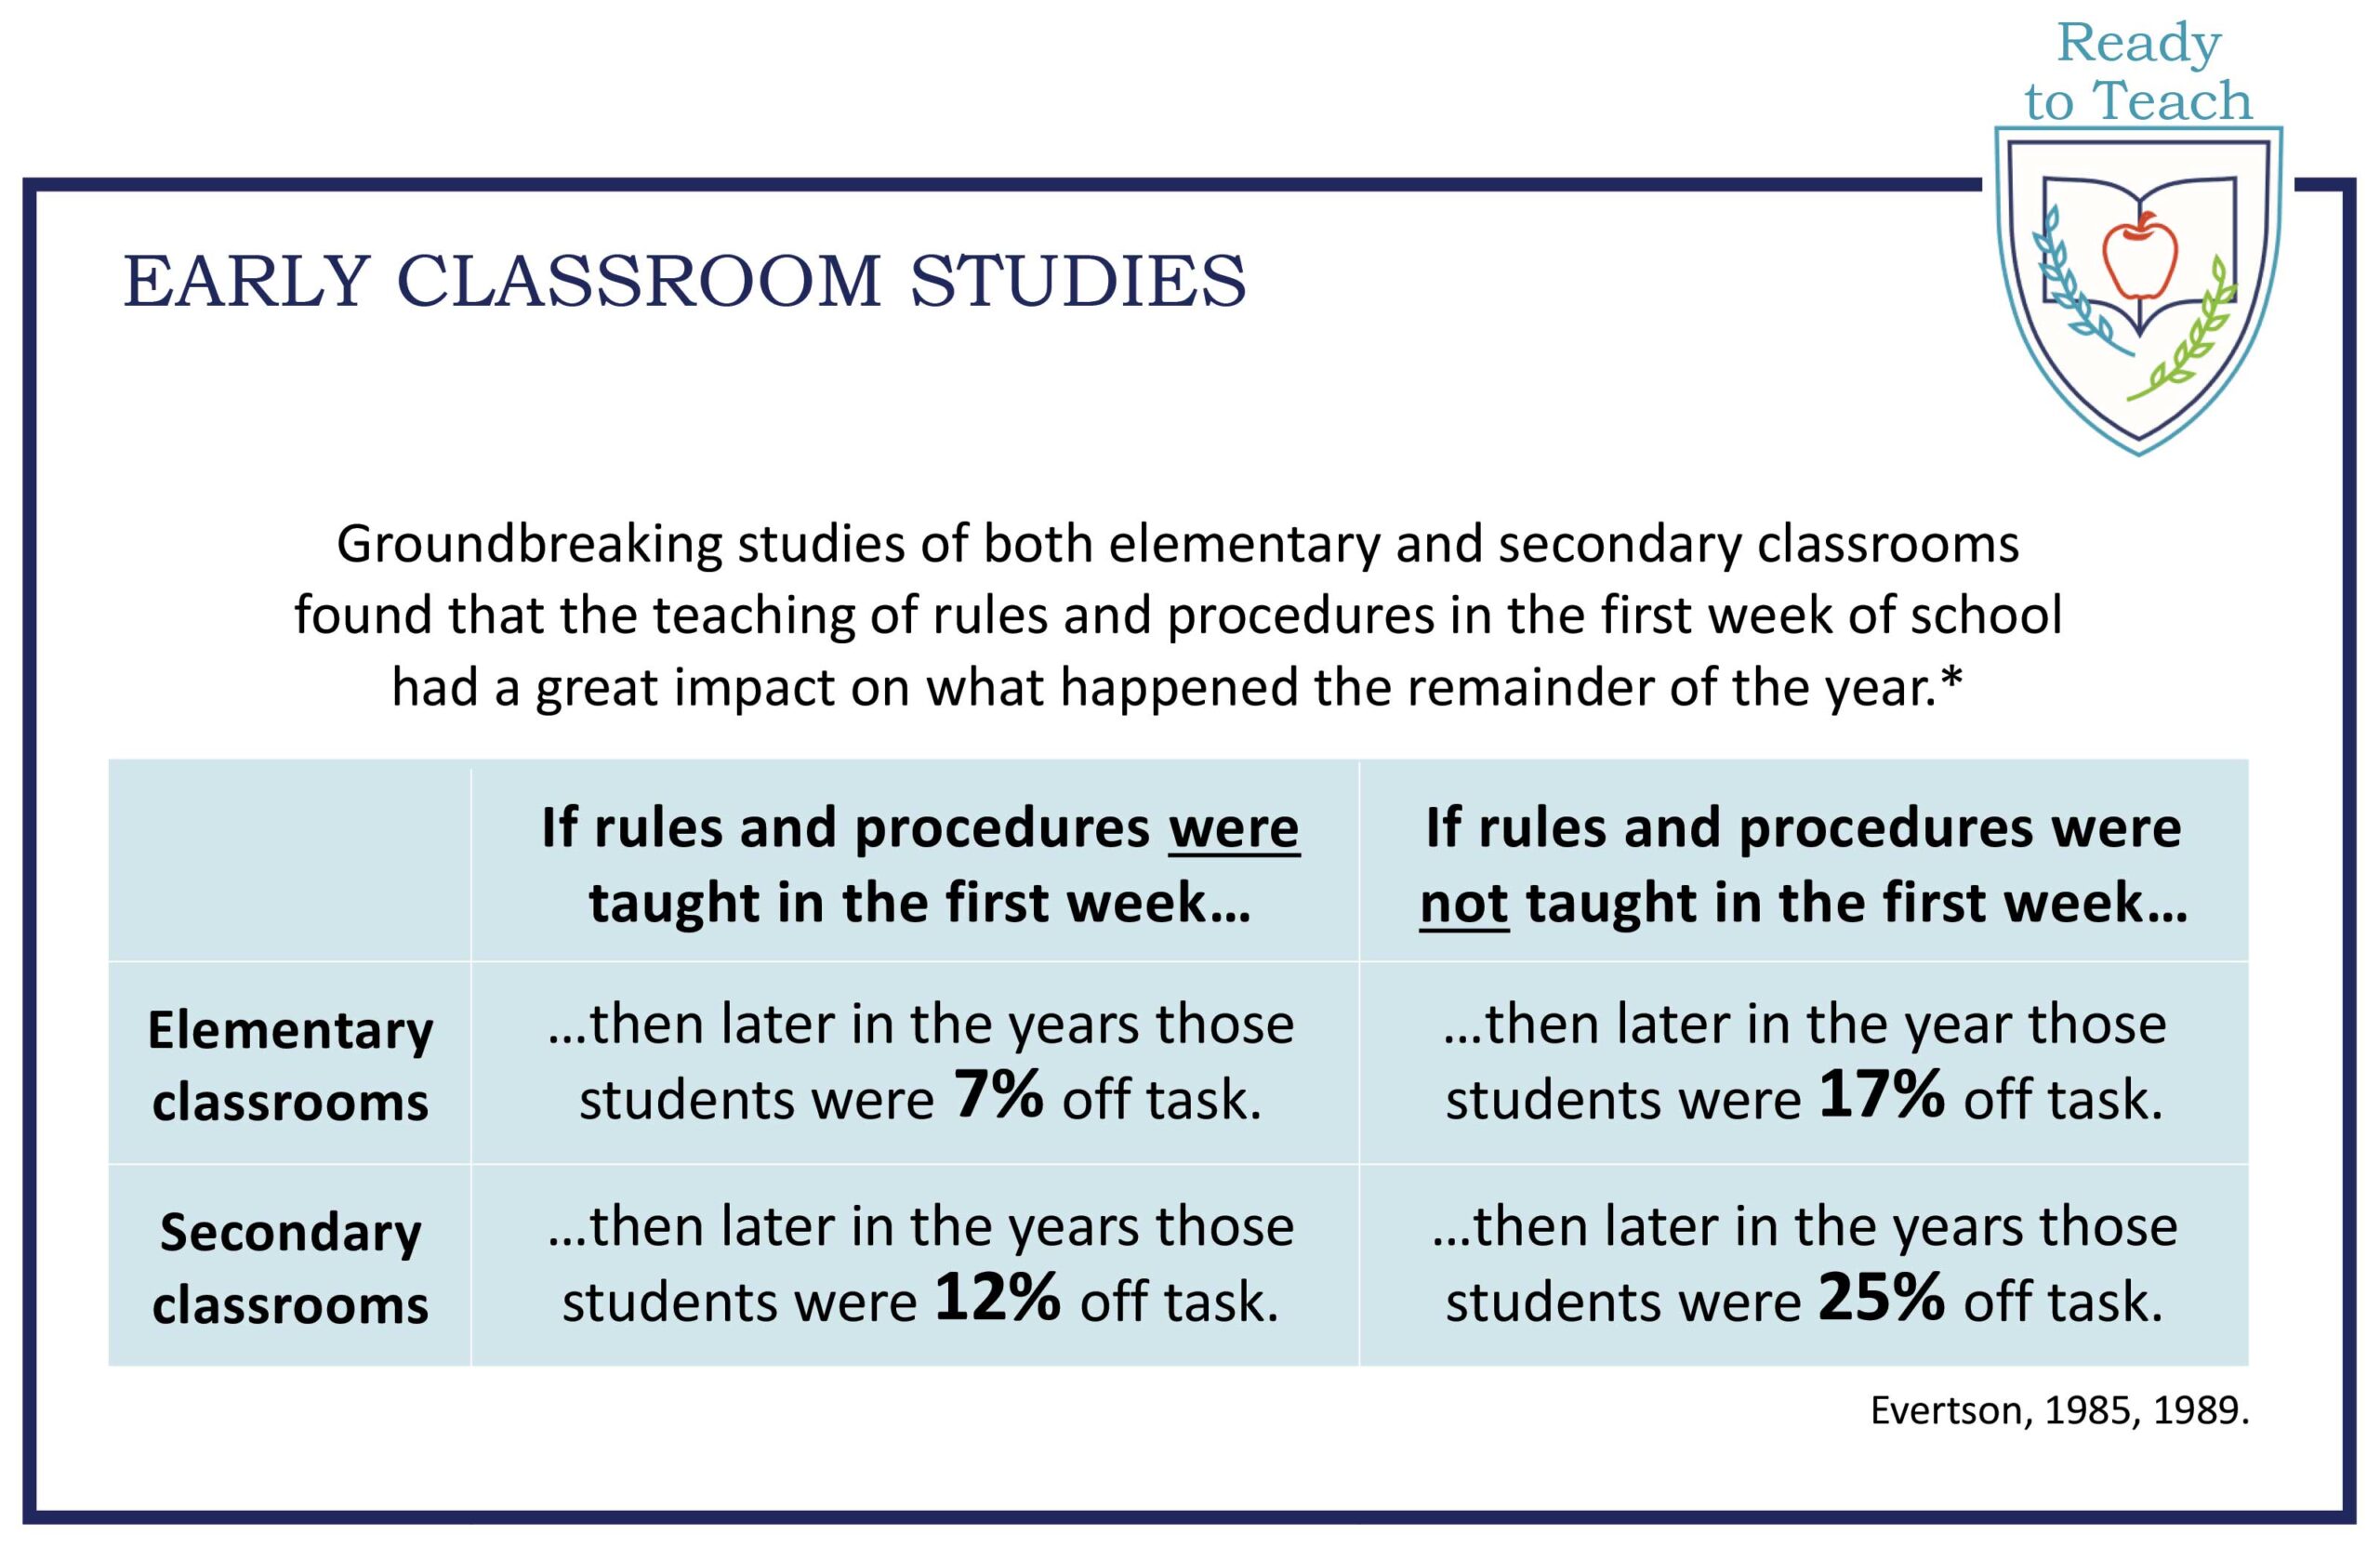 Chart for Early Classroom Studies from Ready To Teach